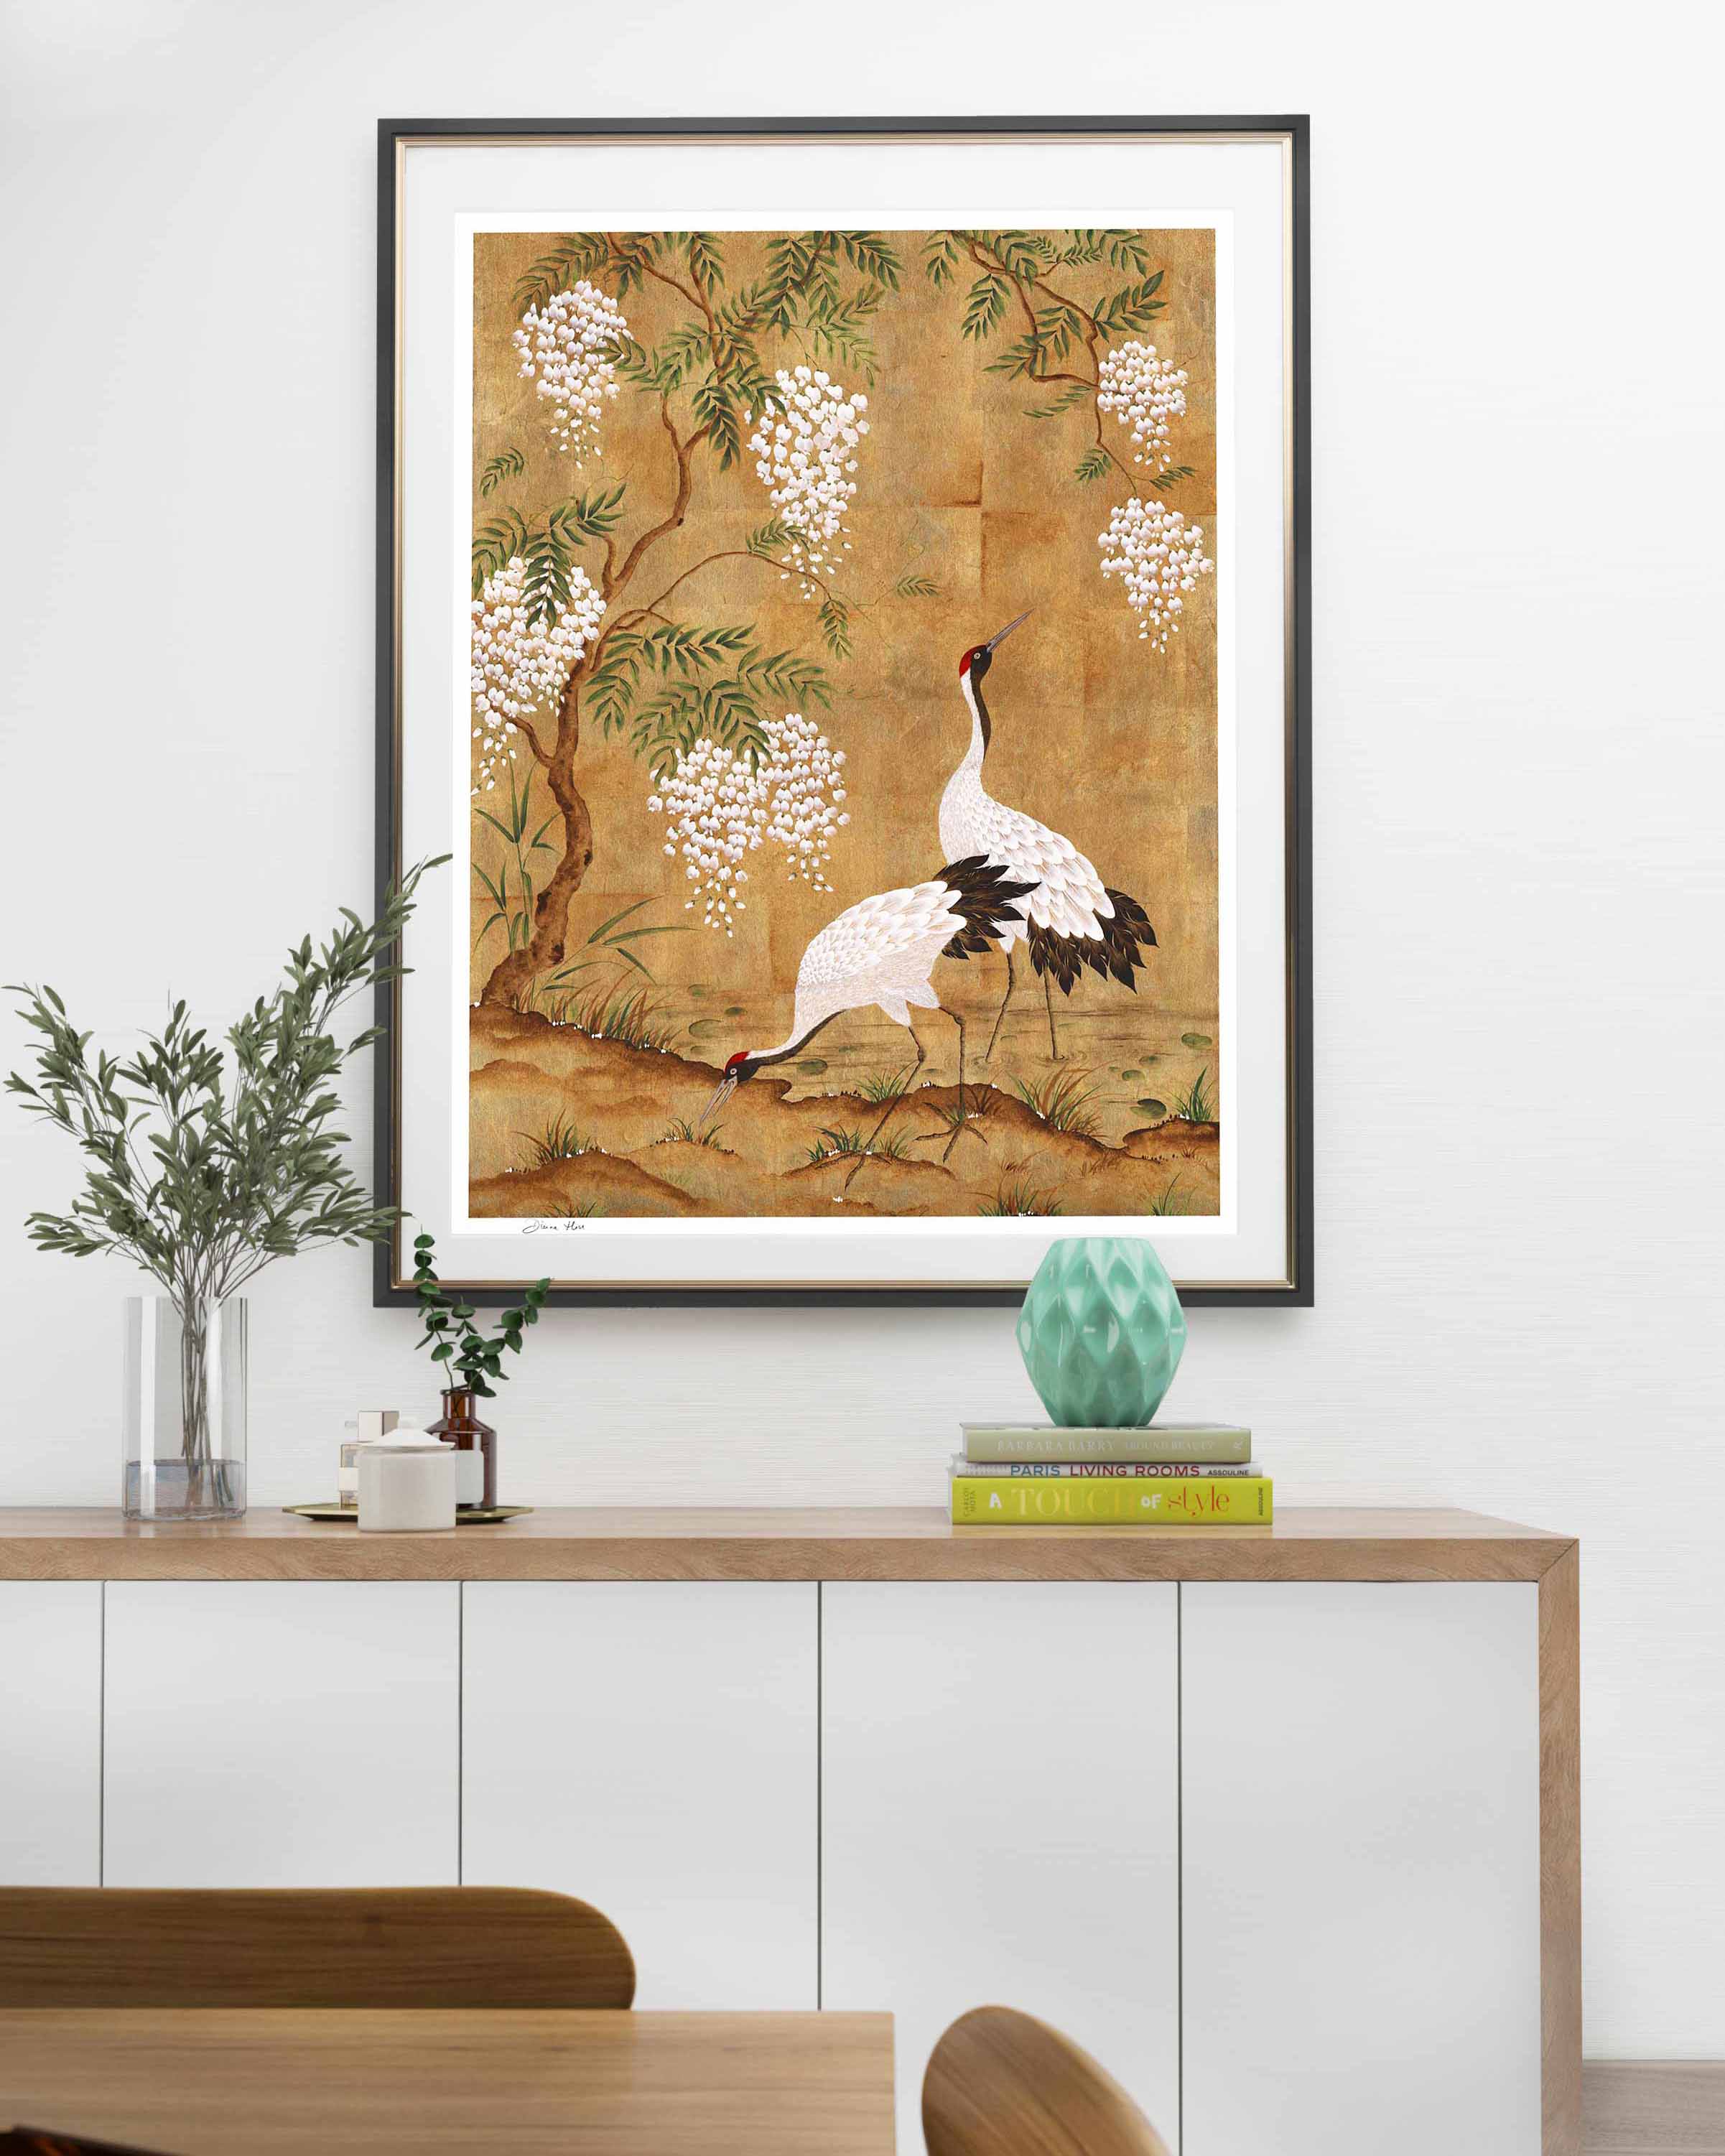 'Okyo' framed chinoiserie art print by Diane Hill in lifestyle photo